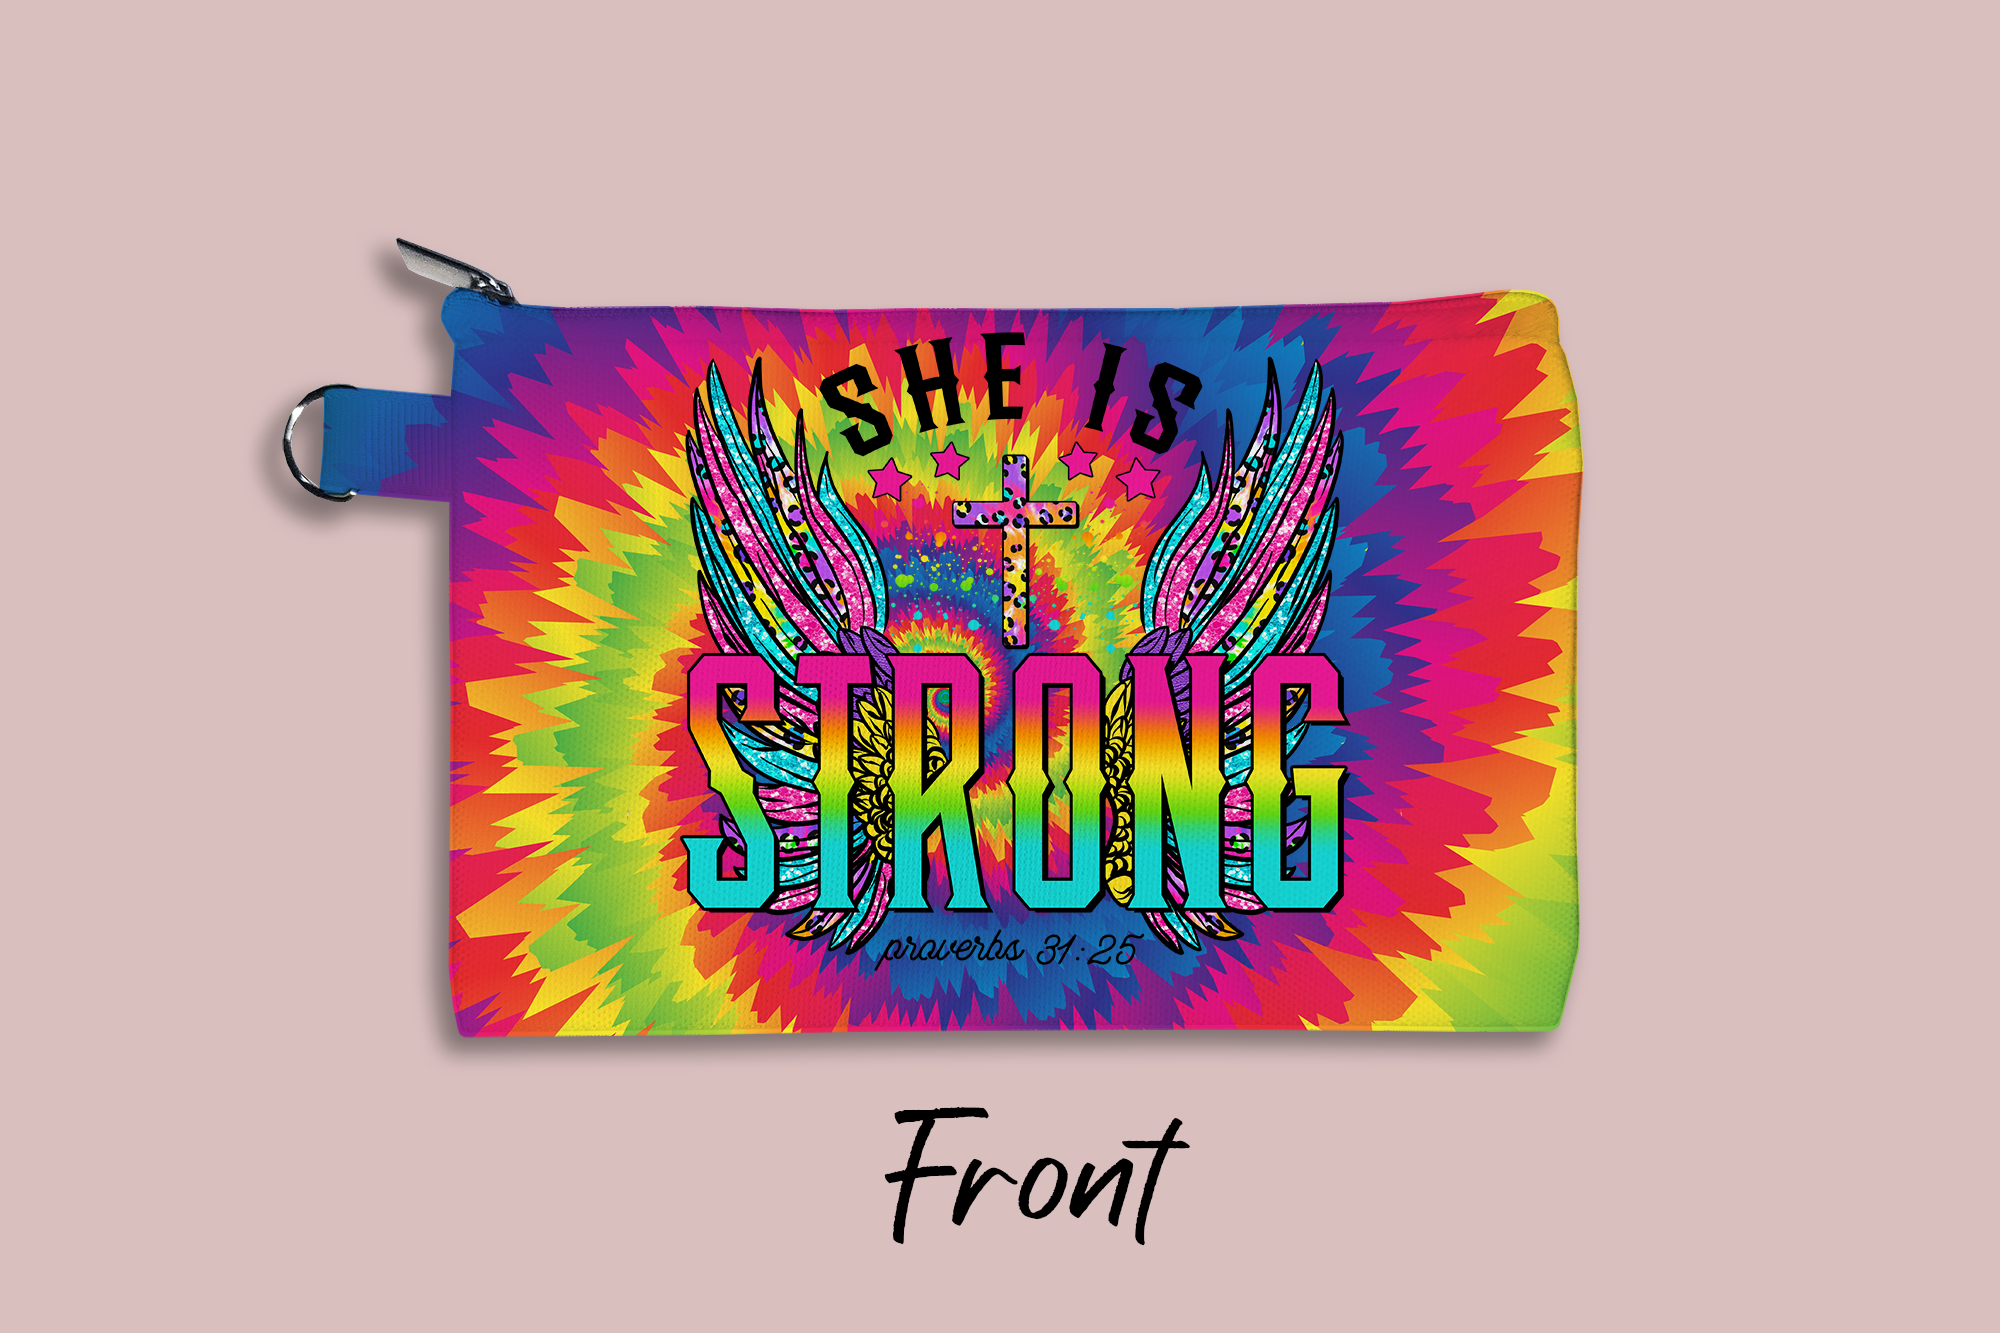 She is Strong (Proverbs 31:25) Personalized Cosmetic Bag